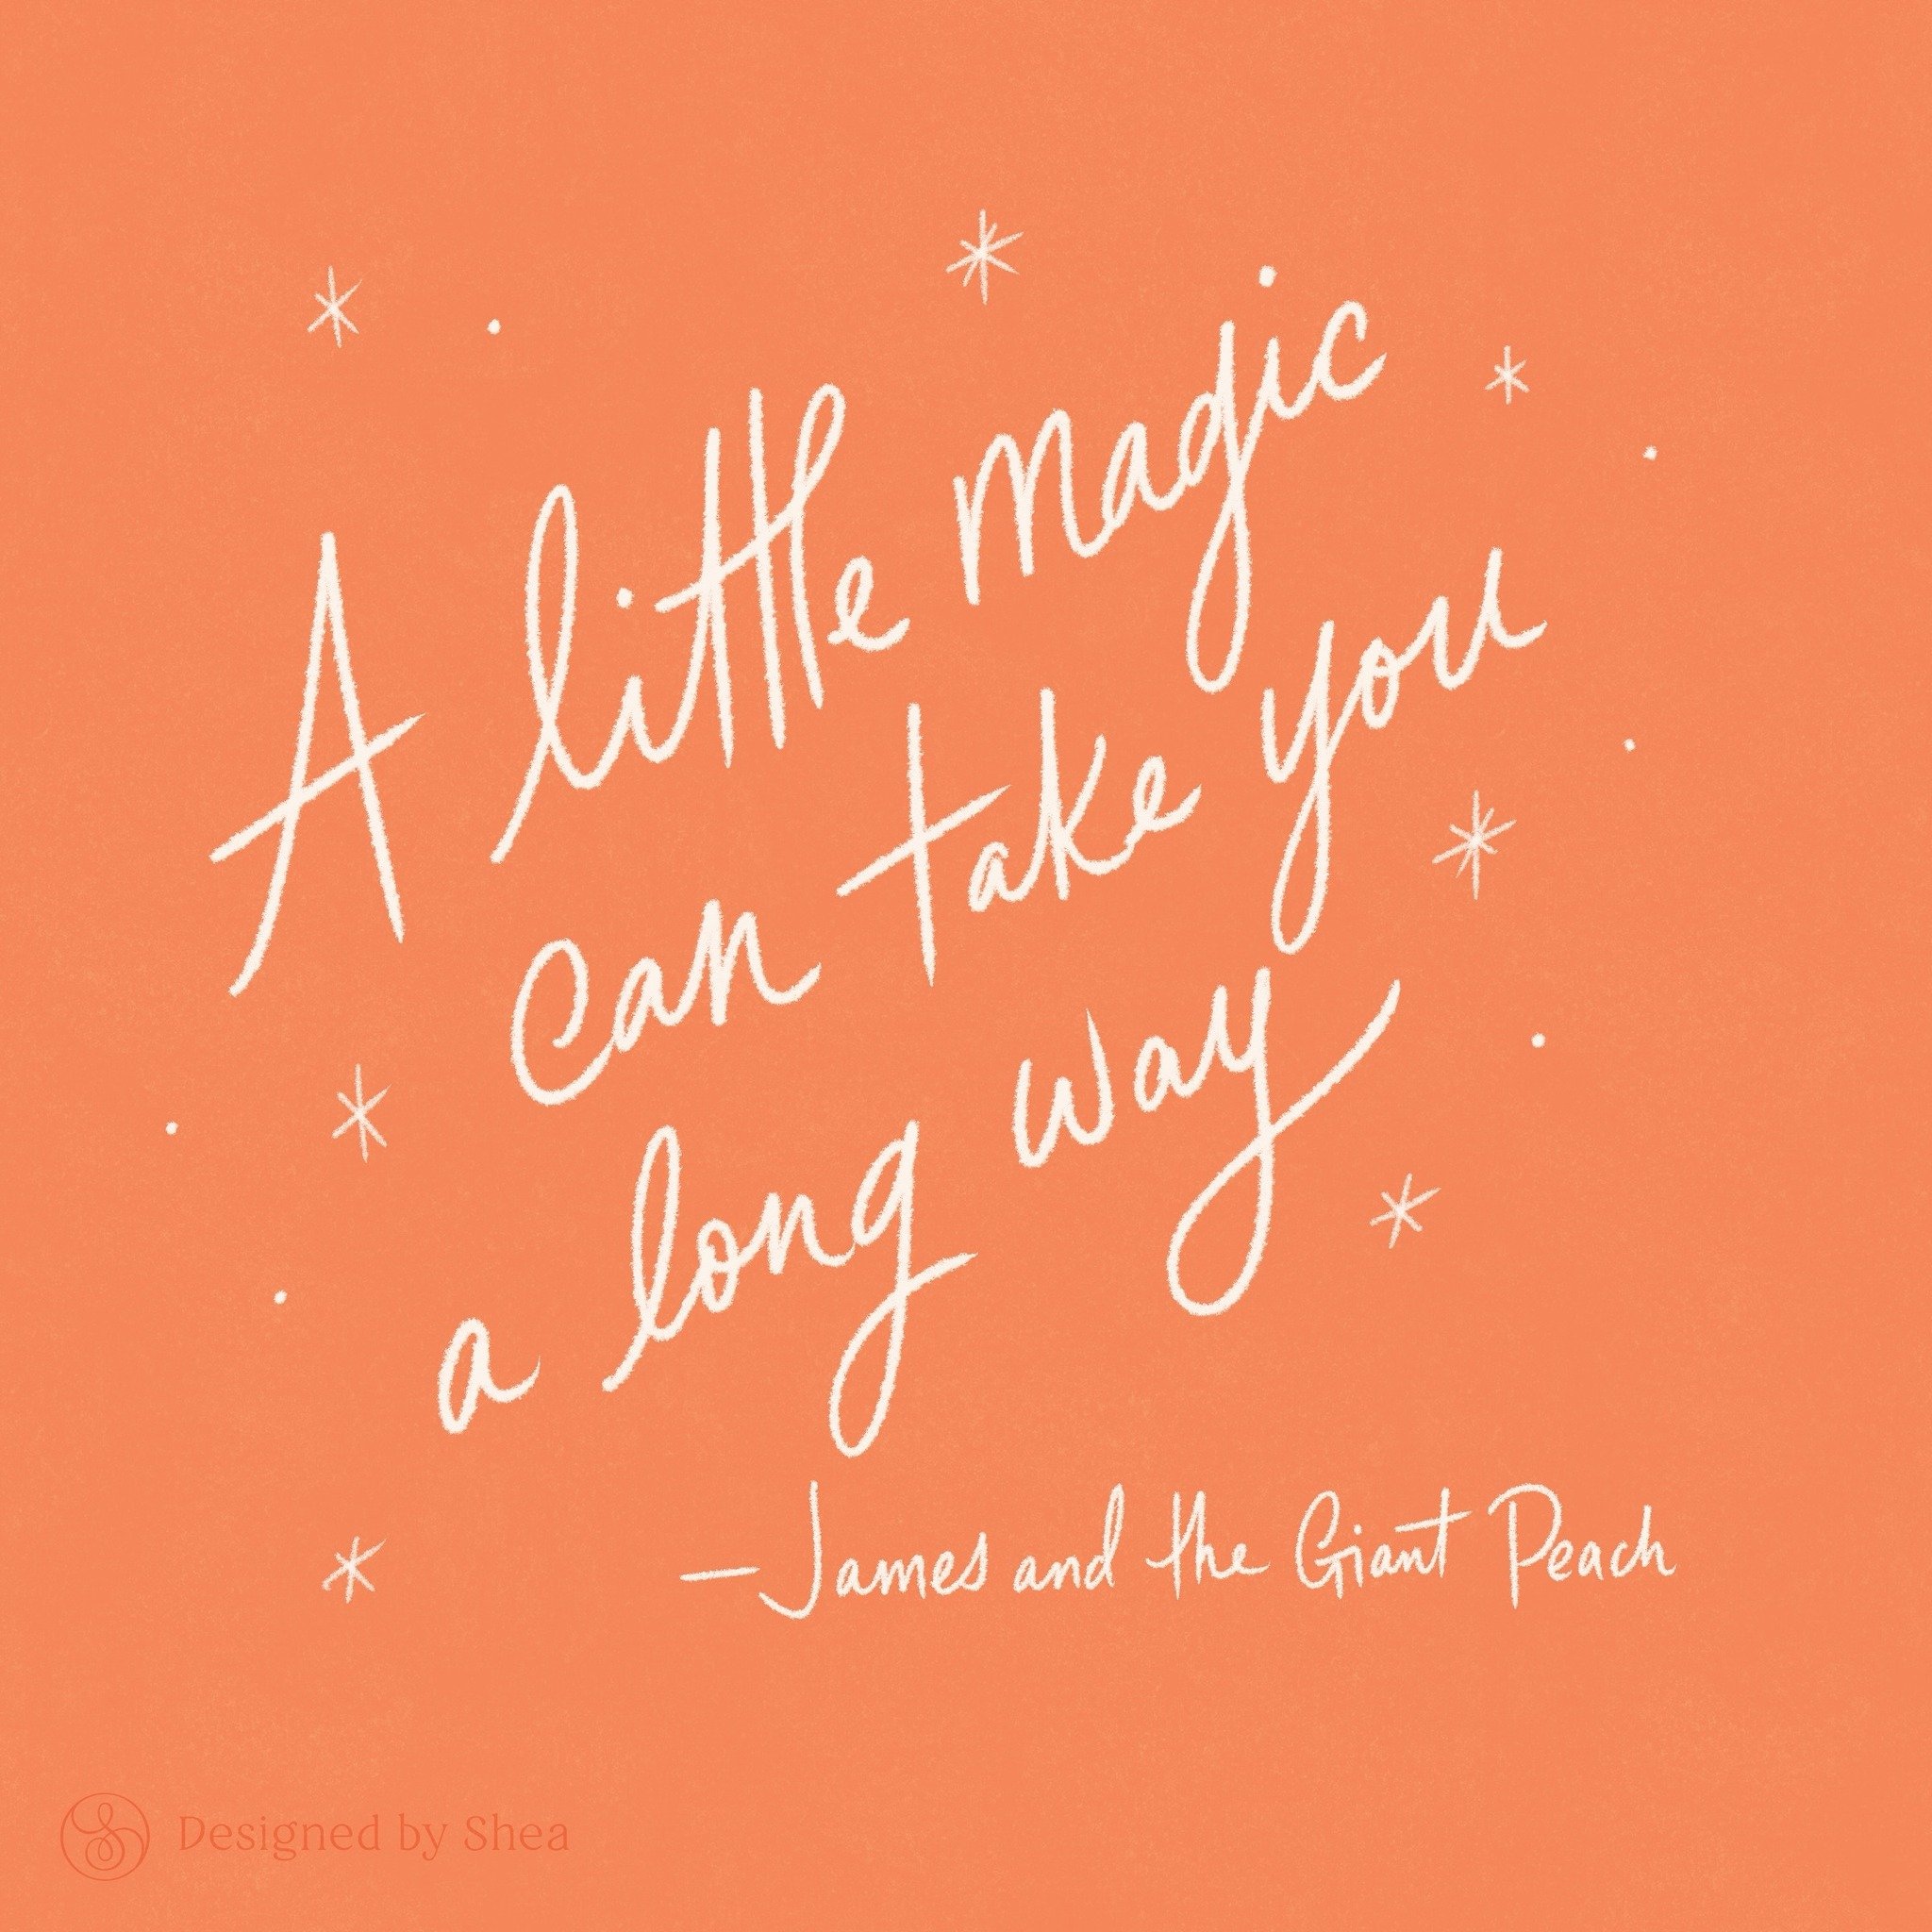 Roald Dahl was hands-down one of the best storytellers. From &ldquo;James and the Giant Peach&rdquo; to &ldquo;Matilda&rdquo; to &ldquo;Charlie and the Chocolate Factory,&rdquo; his imagination and creativity knew no bounds. 
.
.
.
.
.
#designedbyshe